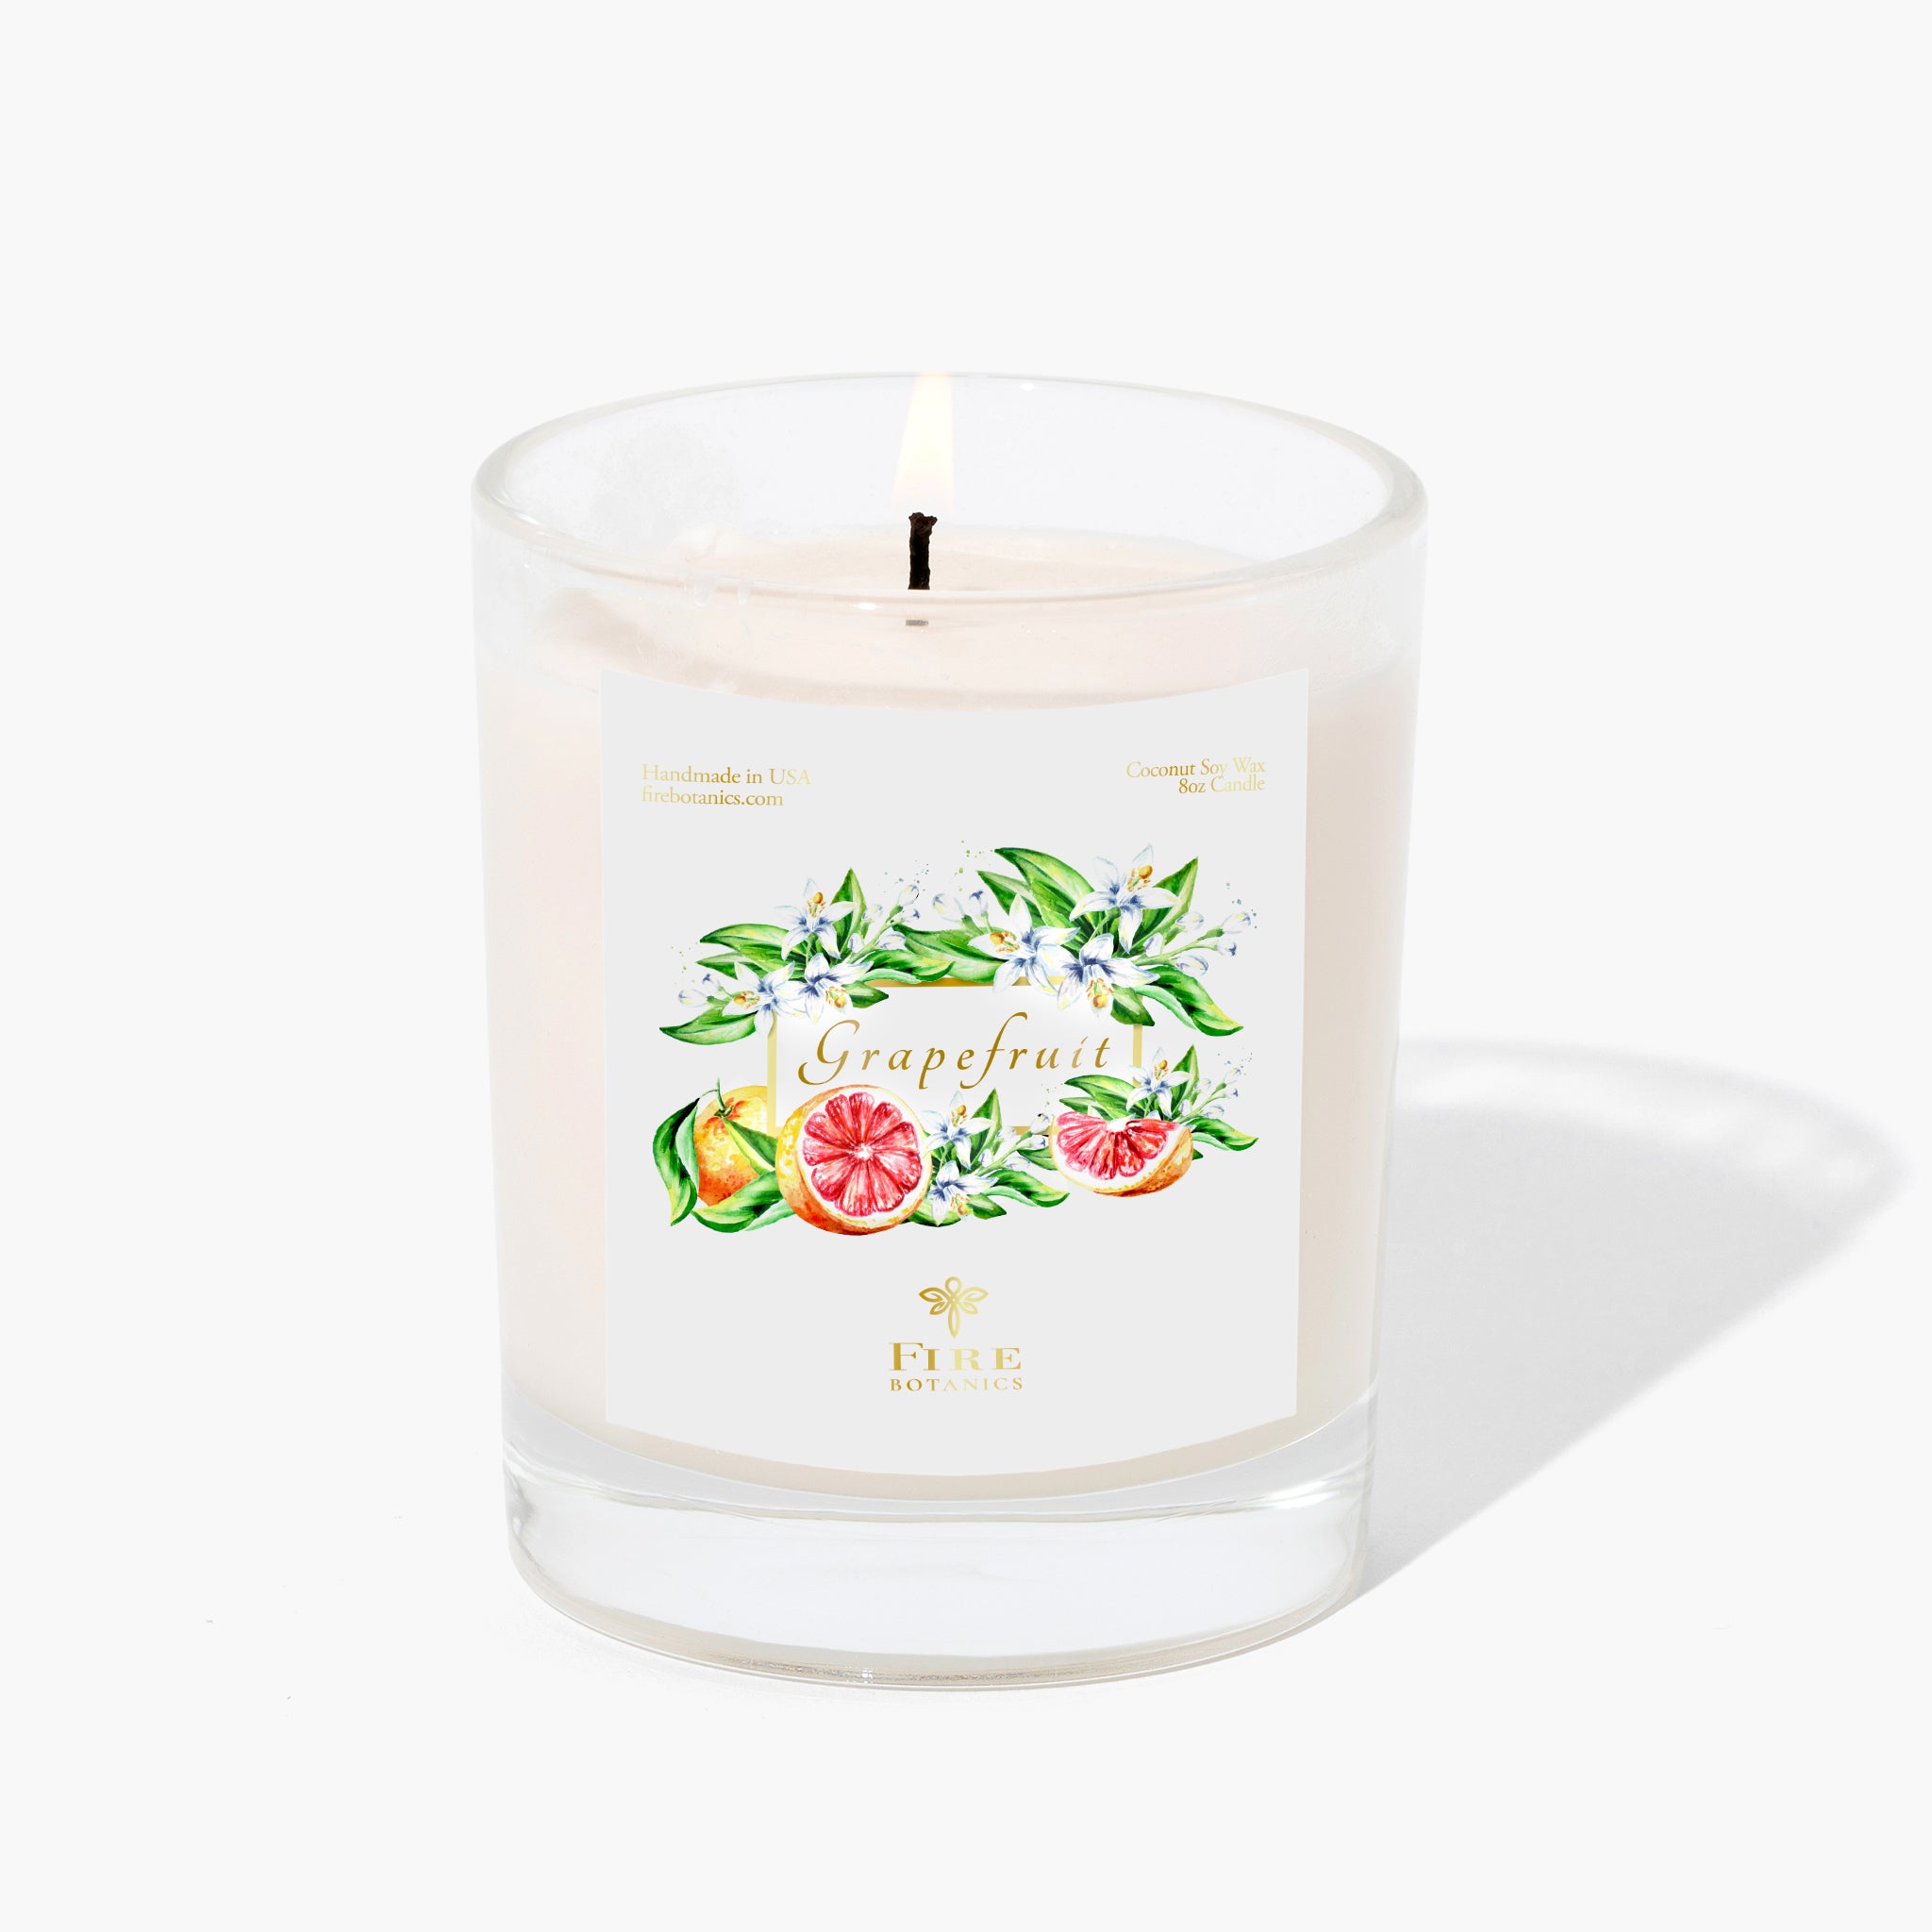 Grapefruit Soy Wax Candle, Long Lasting